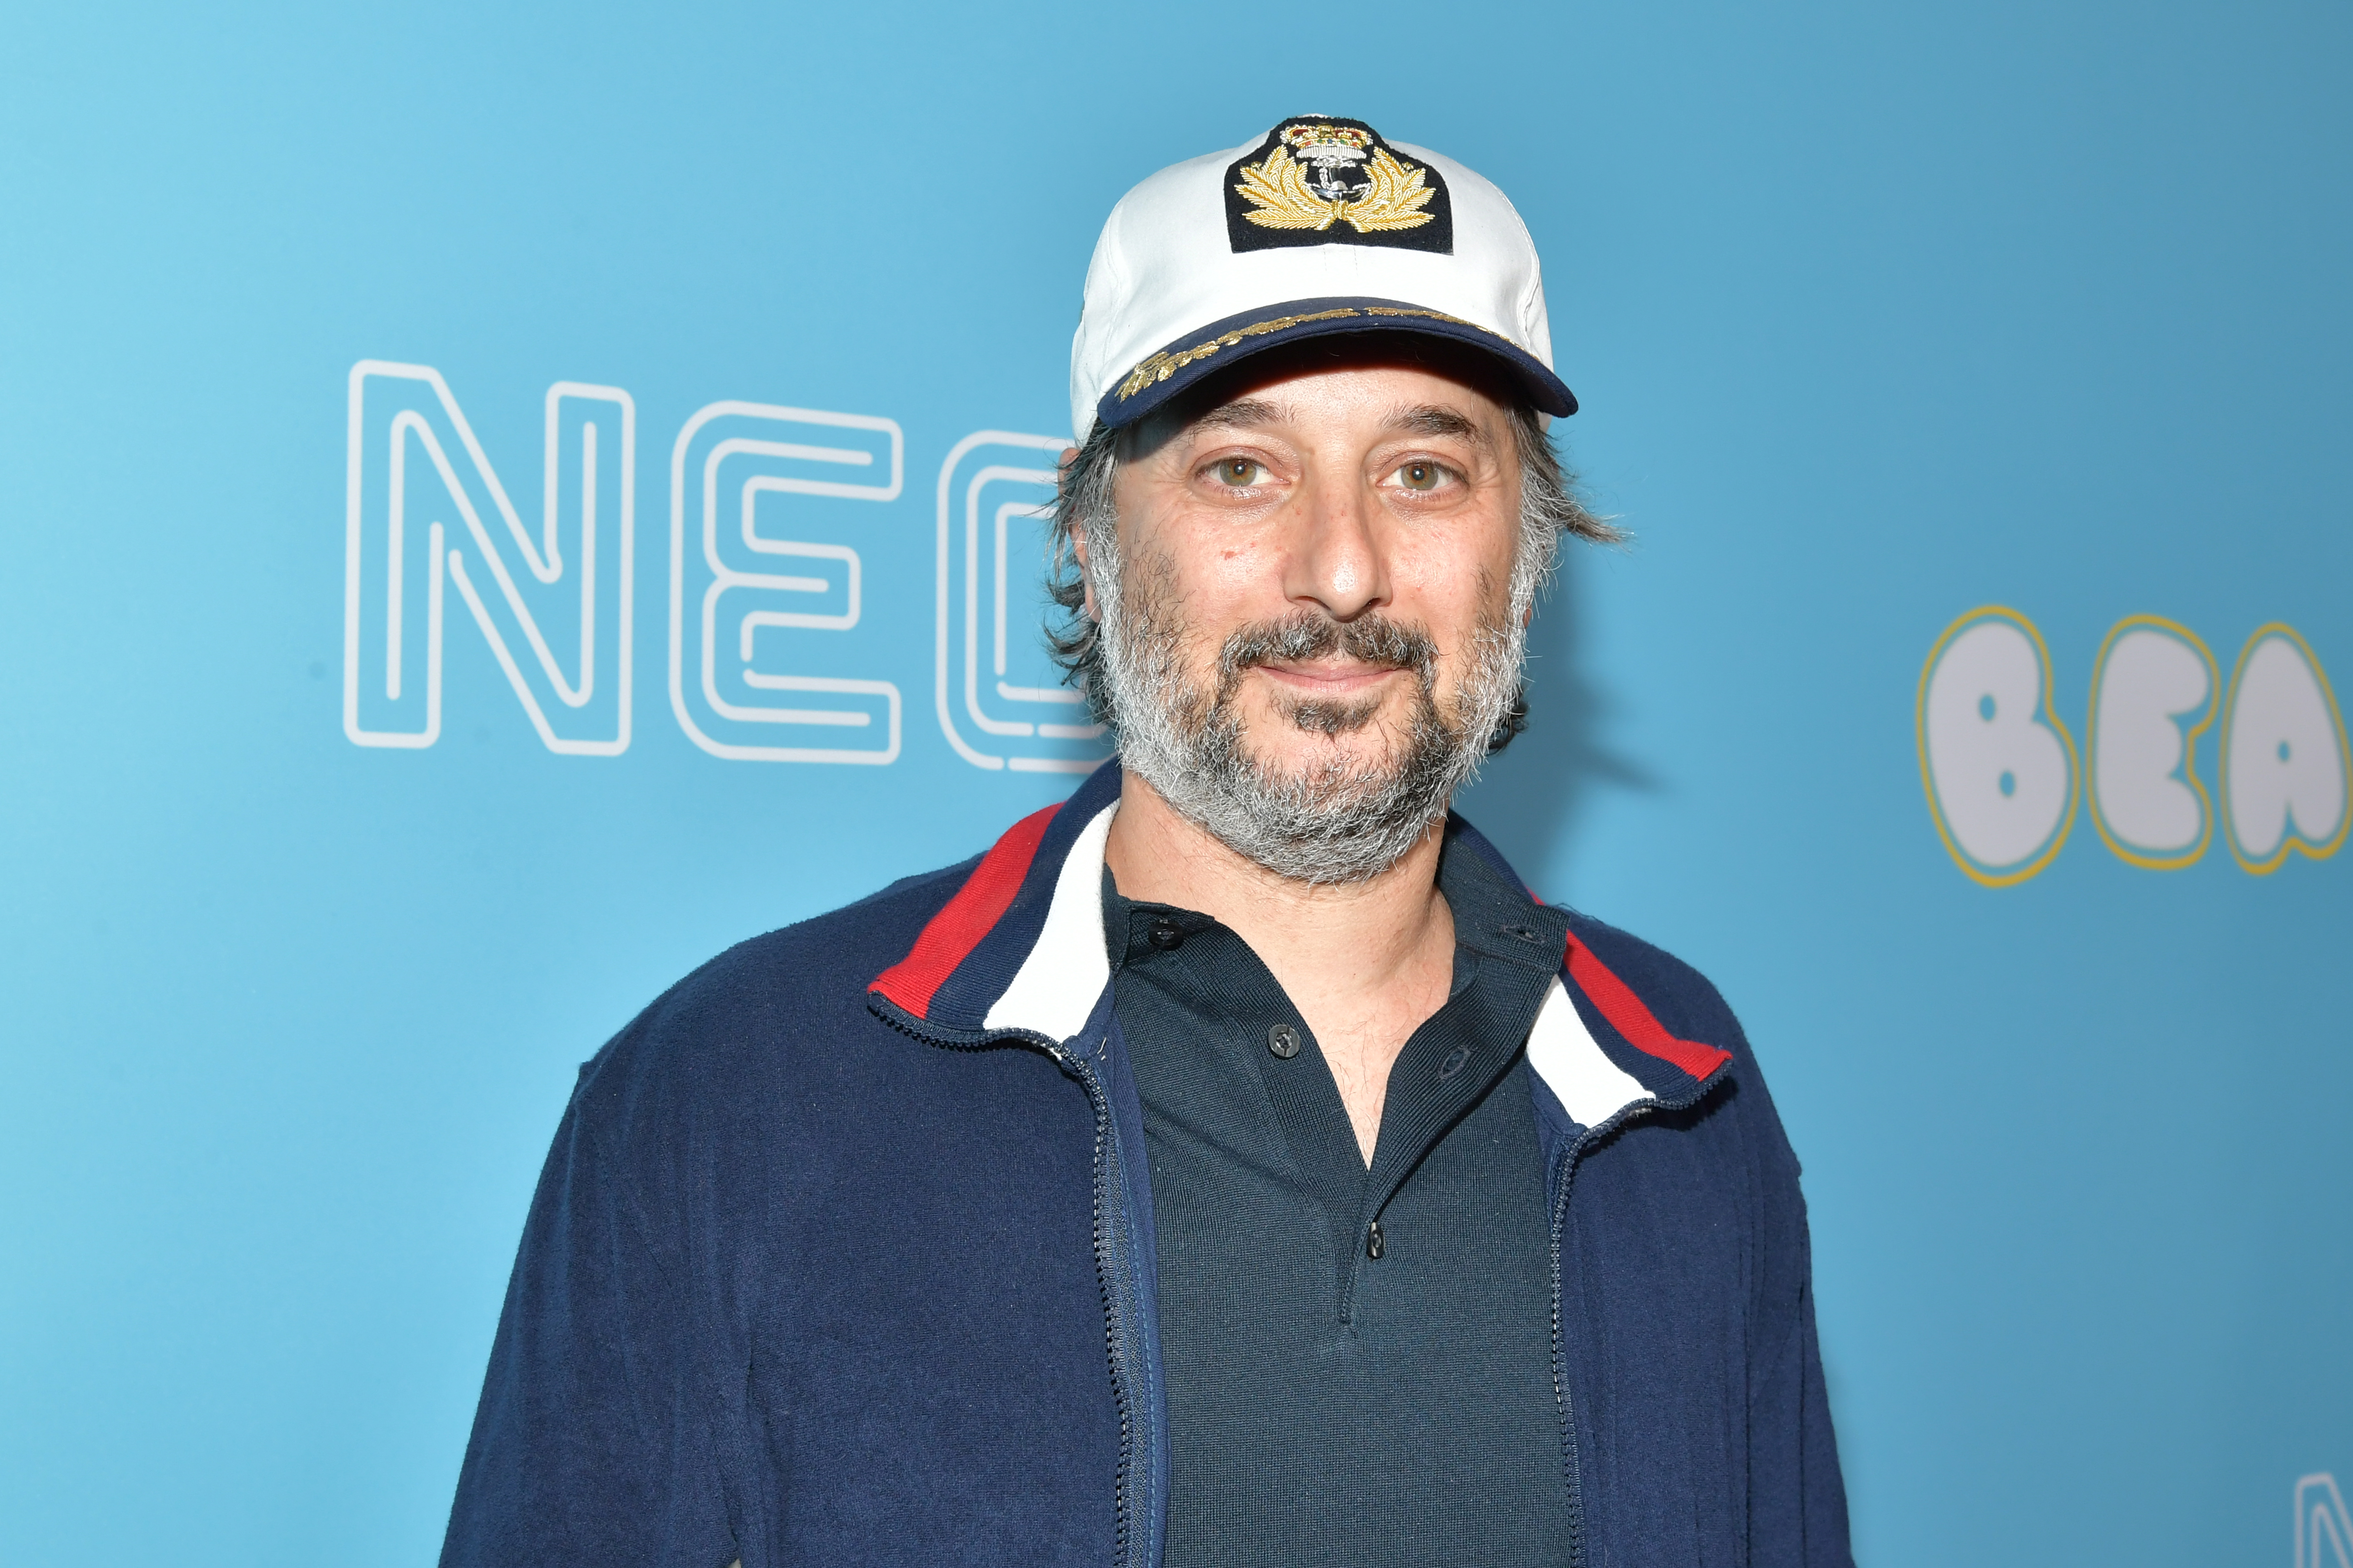 Harmony Korine at the Los Angeles premiere of 'The Beach Bum' at ArcLight Hollywood.